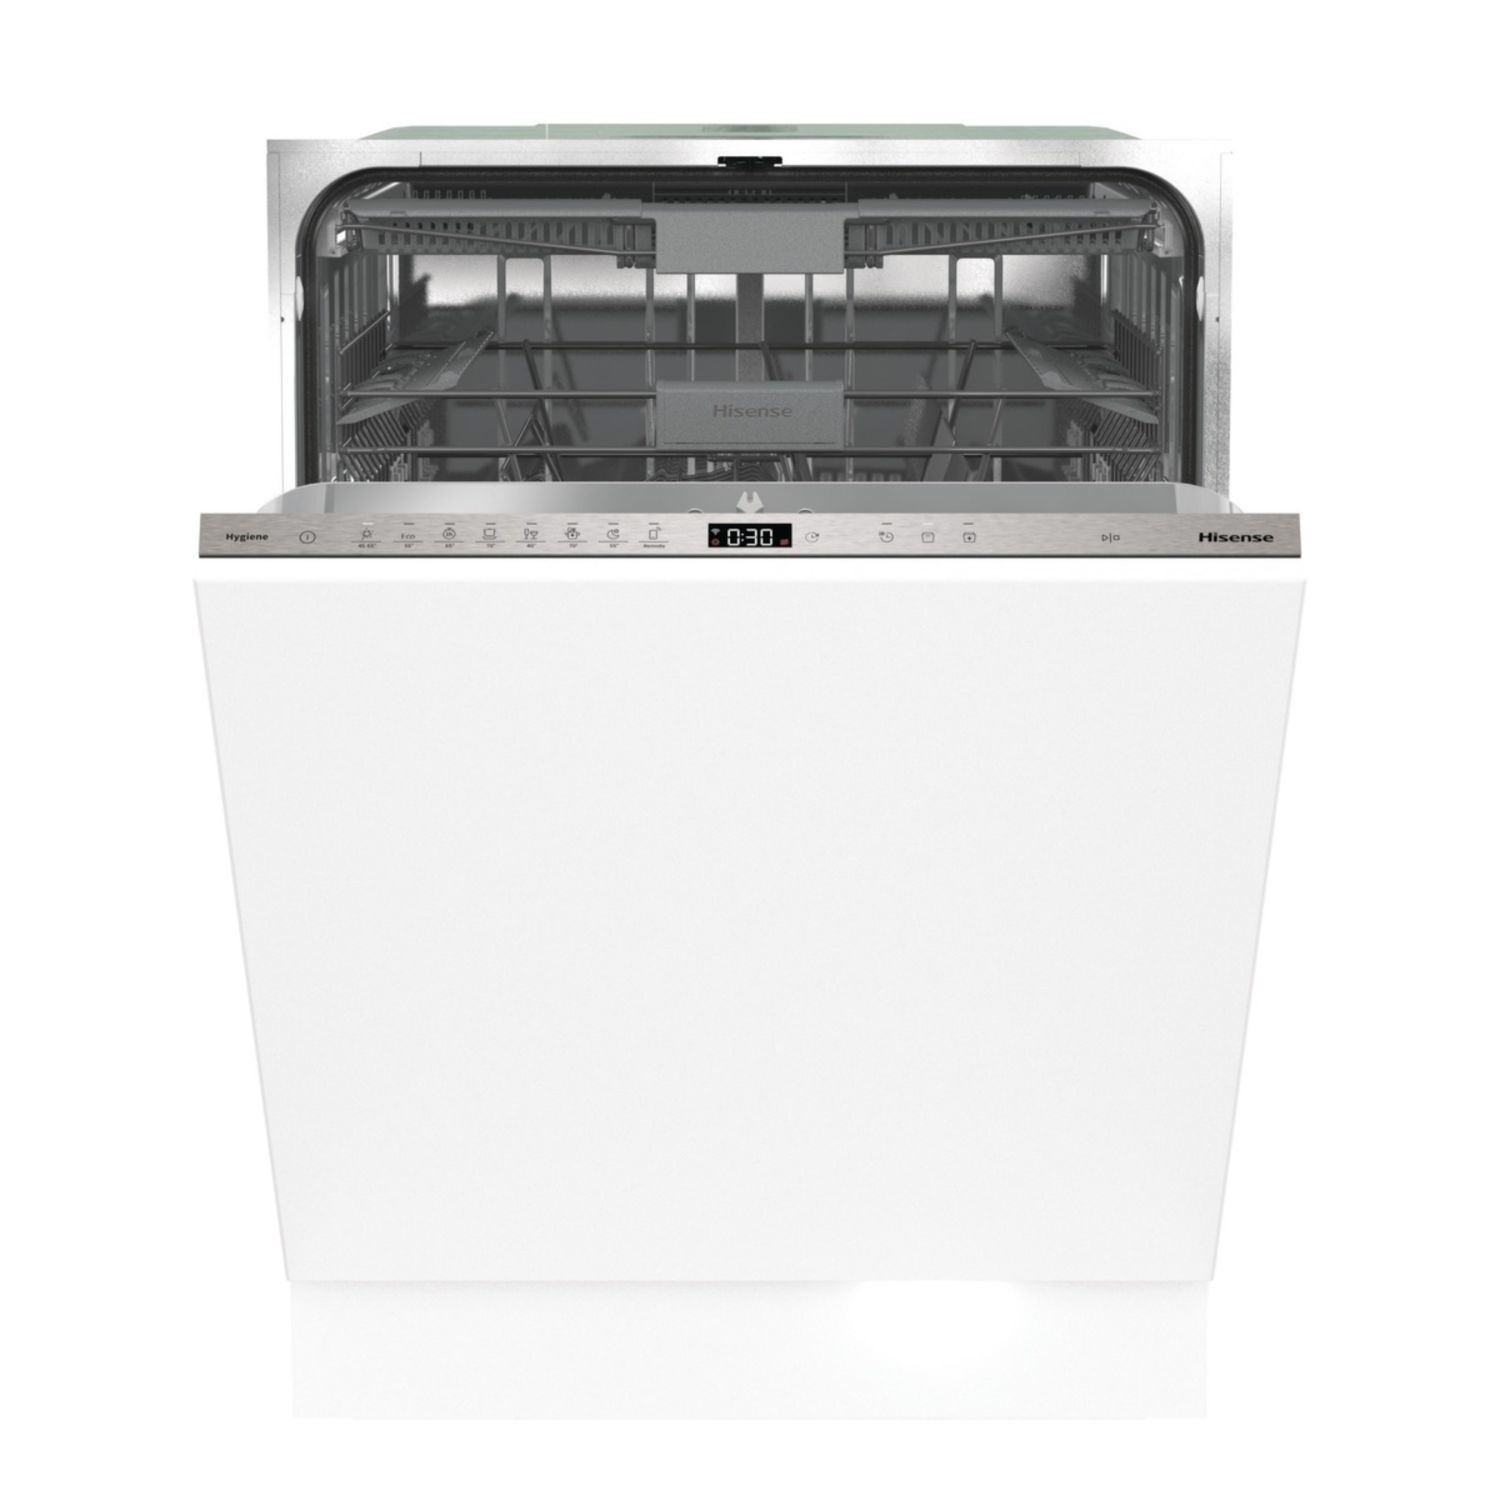 Photos - Other for Computer Hisense 16 Place Settings Fully Integrated Dishwasher 743052 